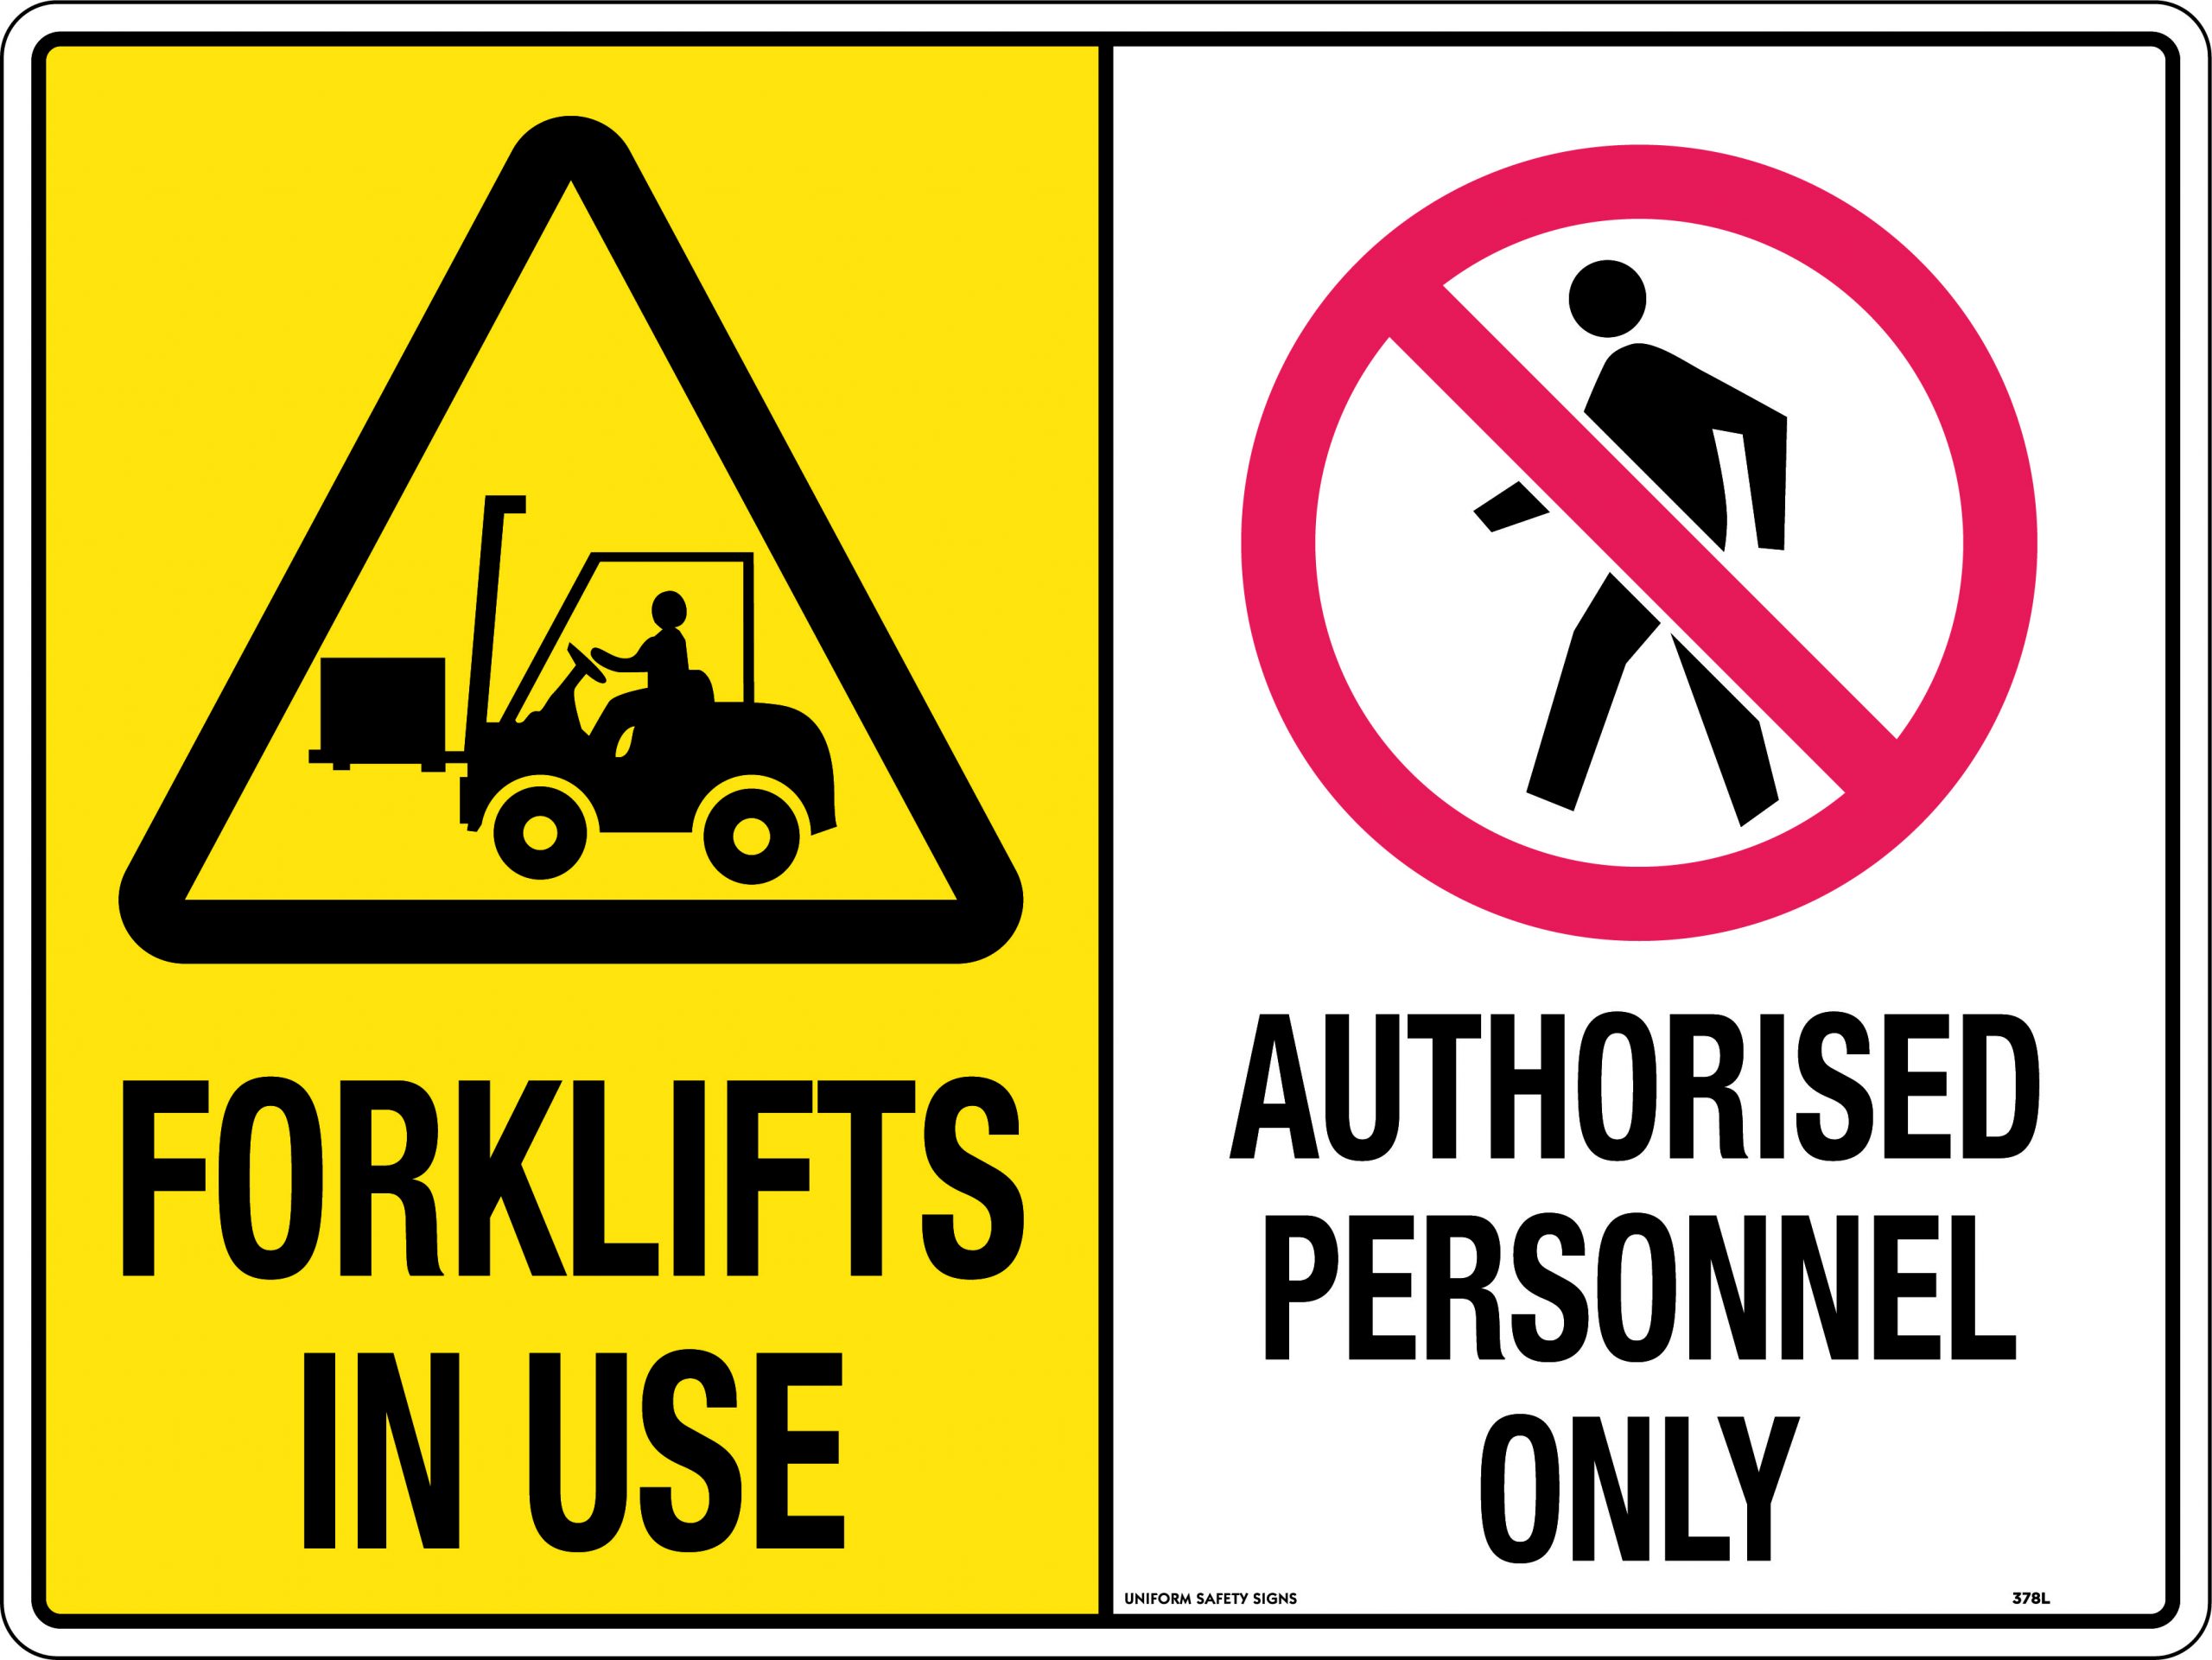 UNIFORM SAFETY 450X300MM METAL MULTI SIGN FORKLIFTS IN USE / AUTHORISE